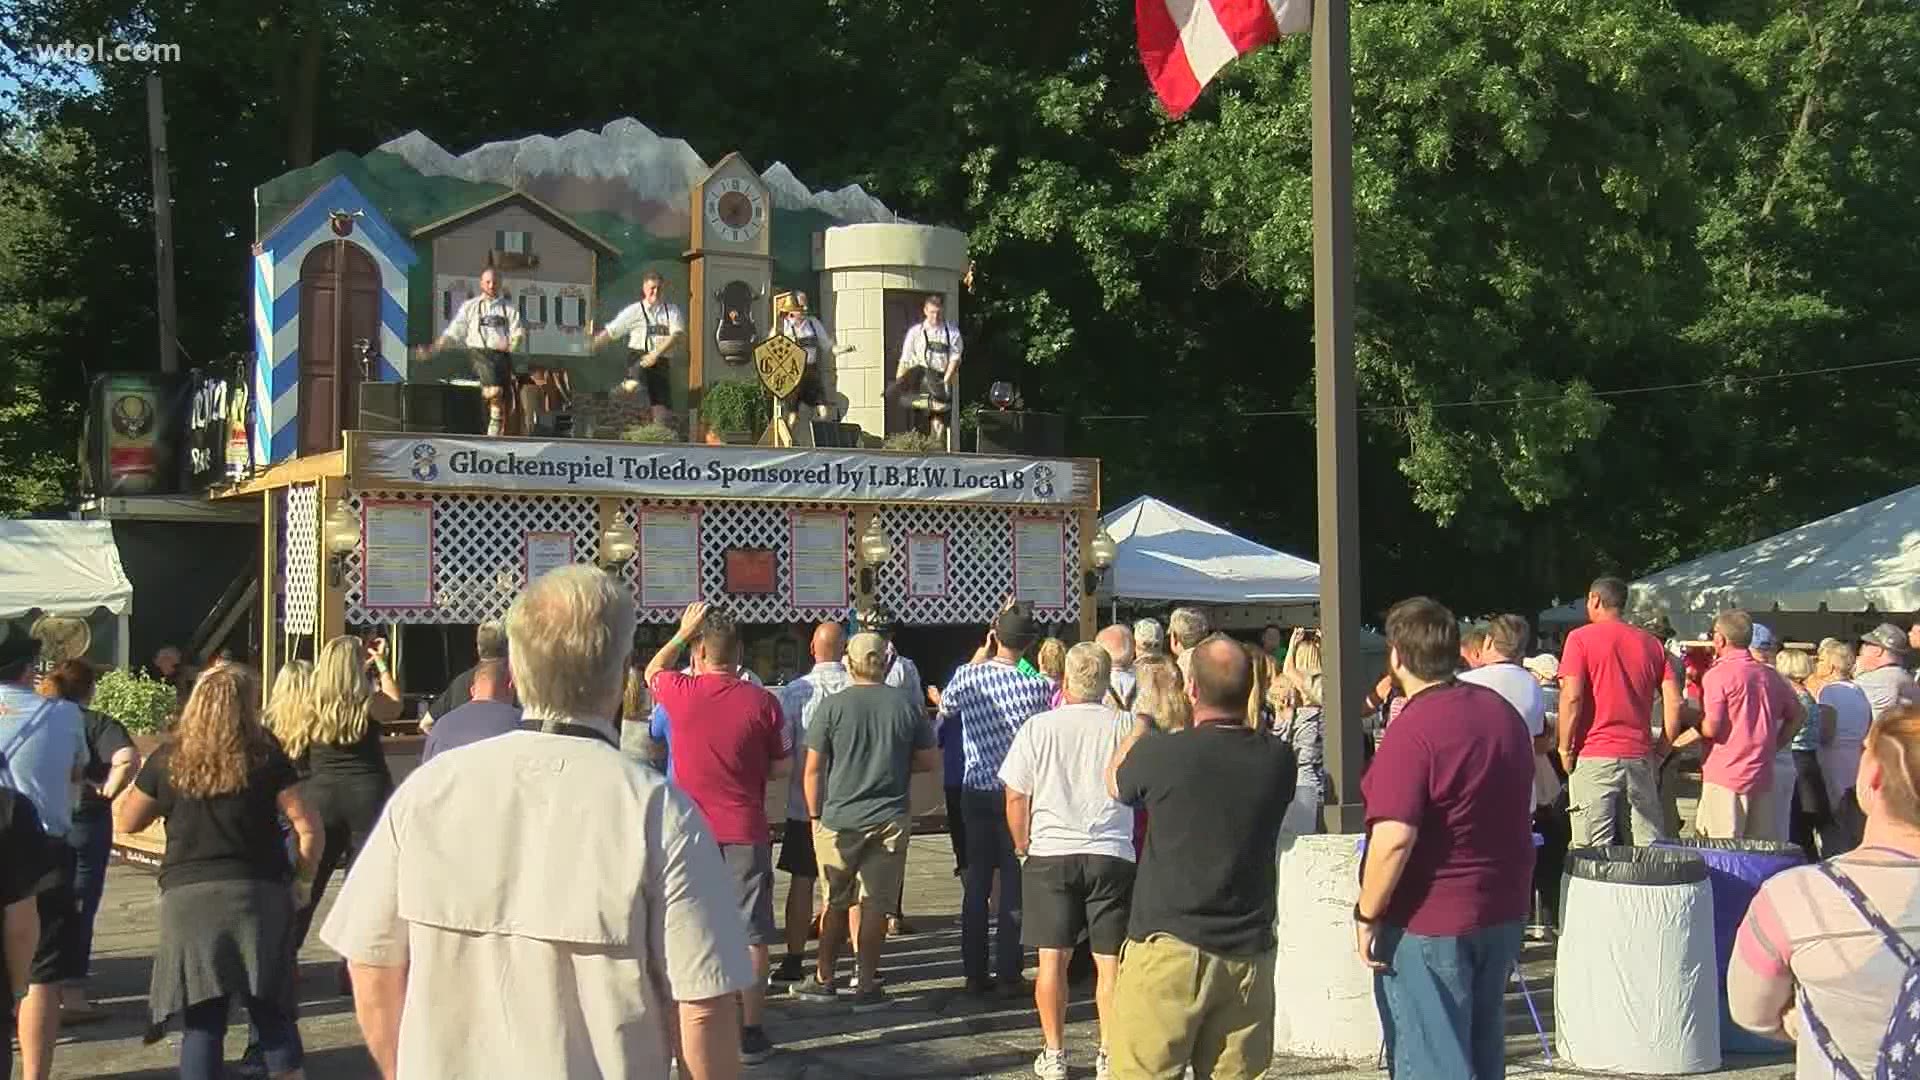 Will the GermanAmerican Festival happen this year?